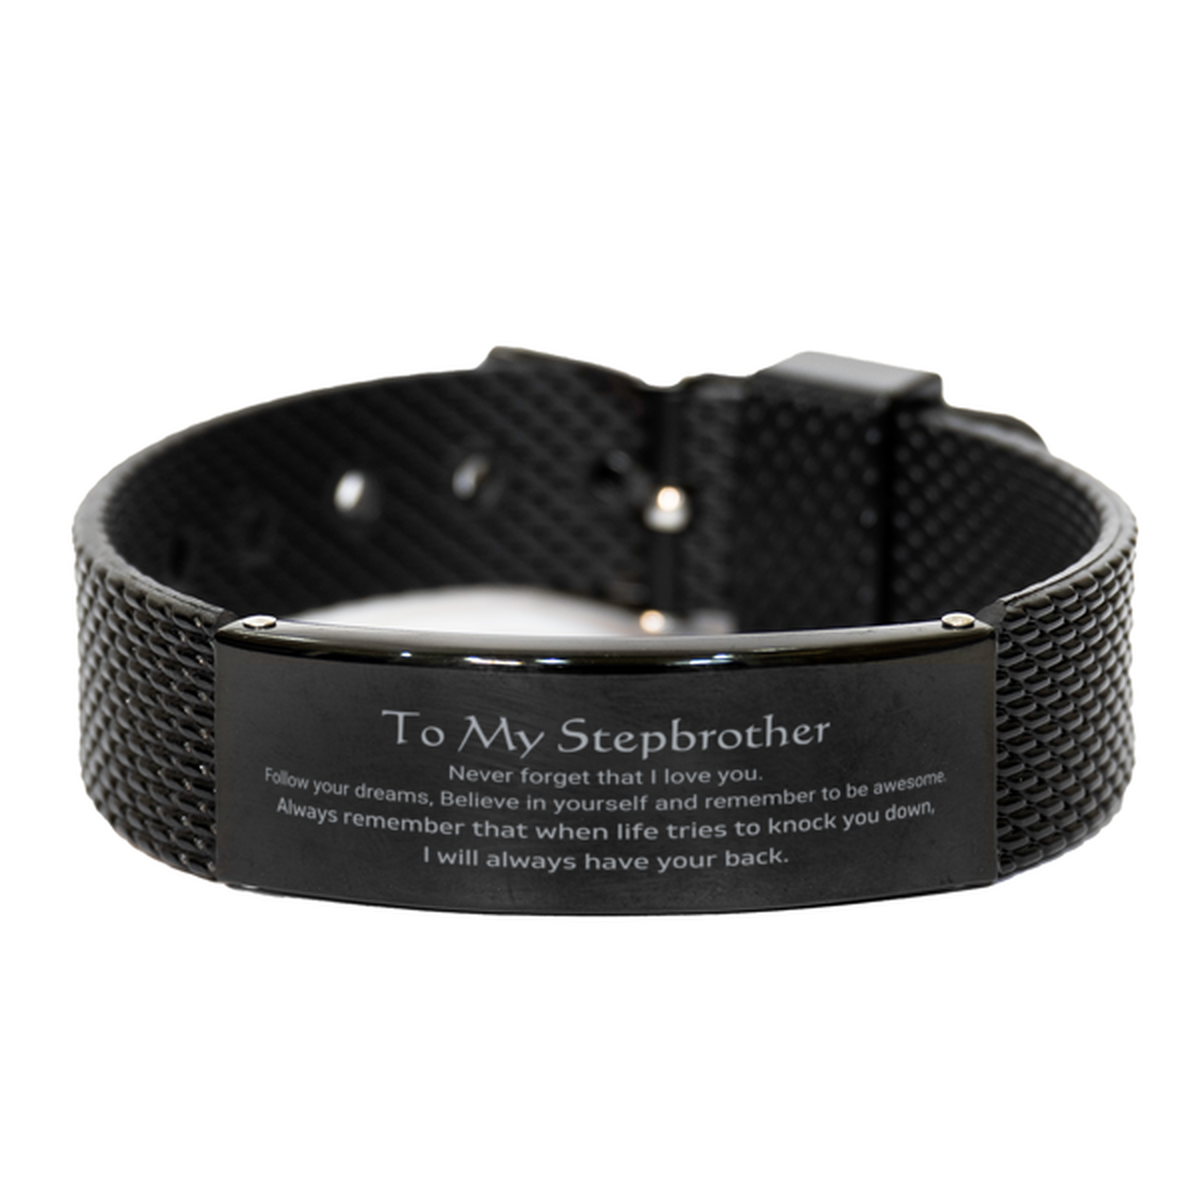 Inspirational Gifts for Stepbrother, Follow your dreams, Believe in yourself, Stepbrother Black Shark Mesh Bracelet, Birthday Christmas Unique Gifts For Stepbrother